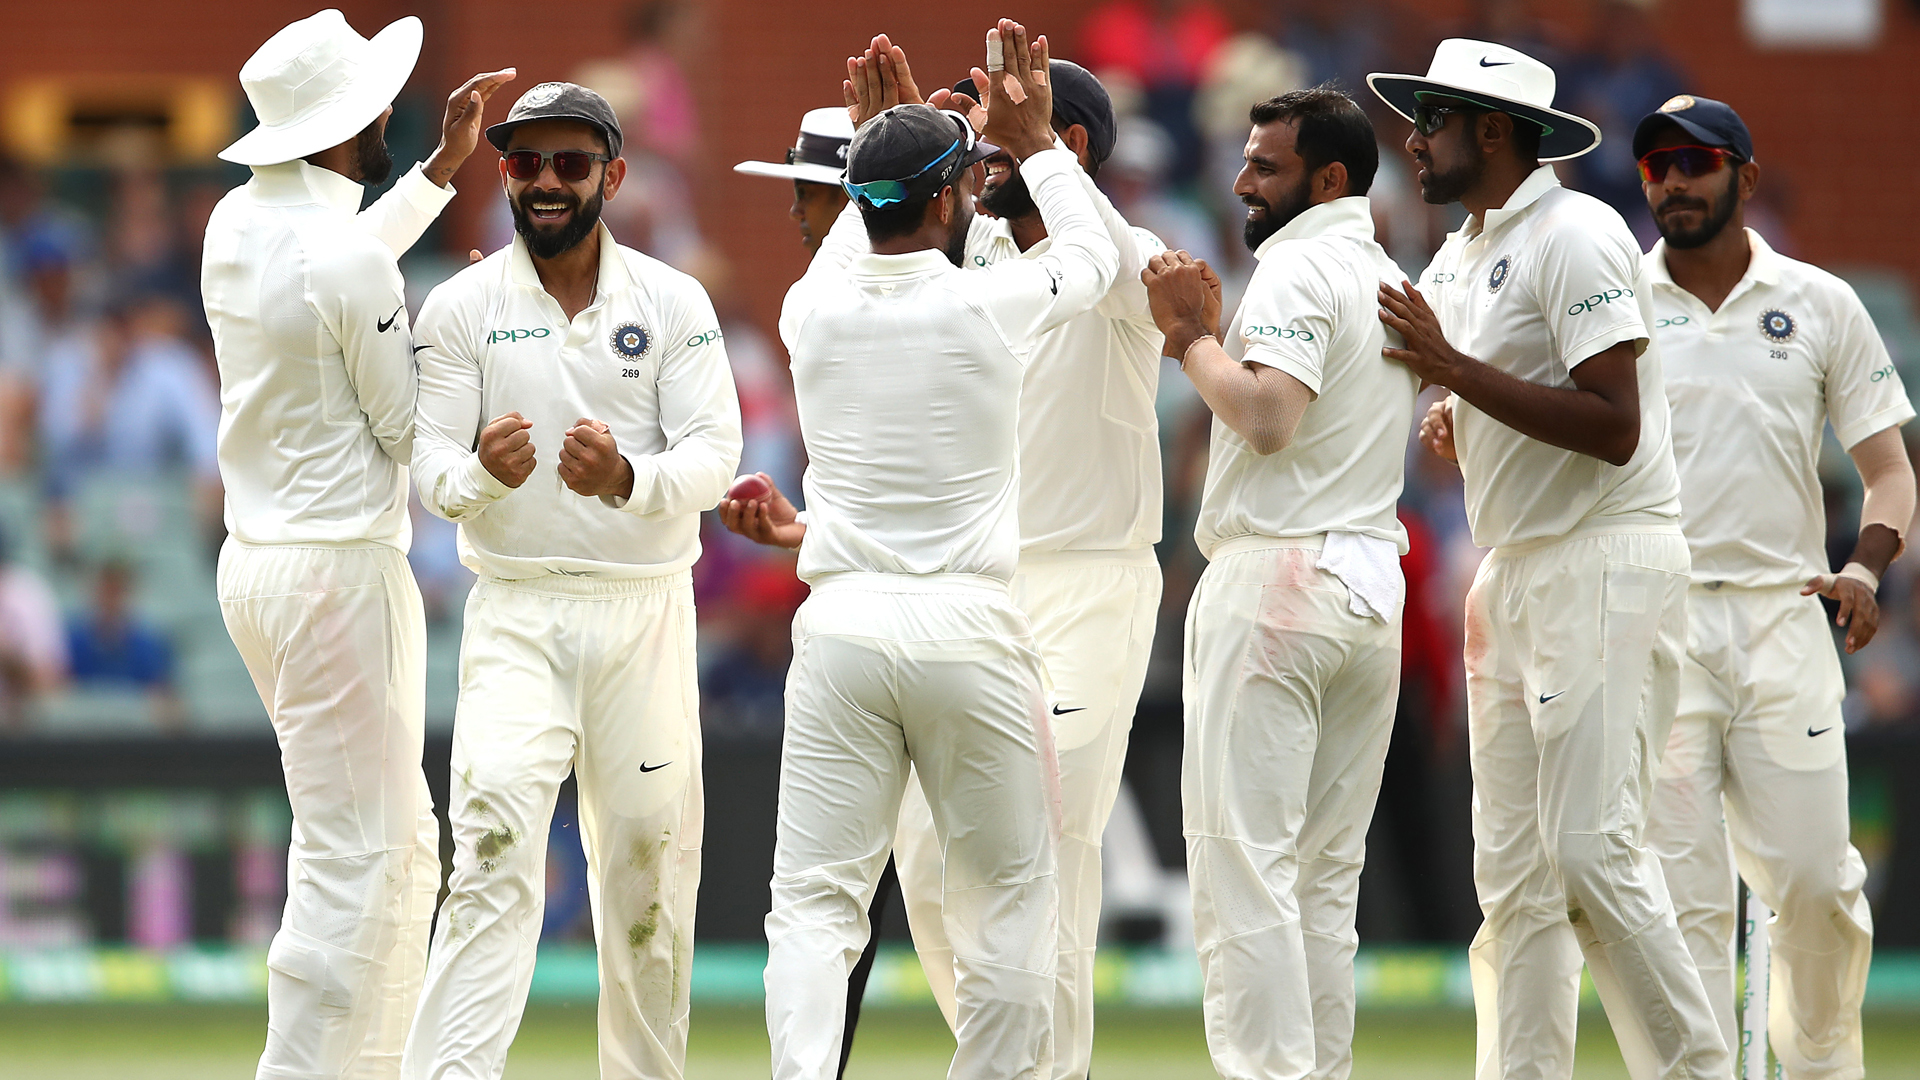 Australia's batting woes continued as India closed in on victory in the first Test, the hosts closing on 104-4 in pursuit of 323.